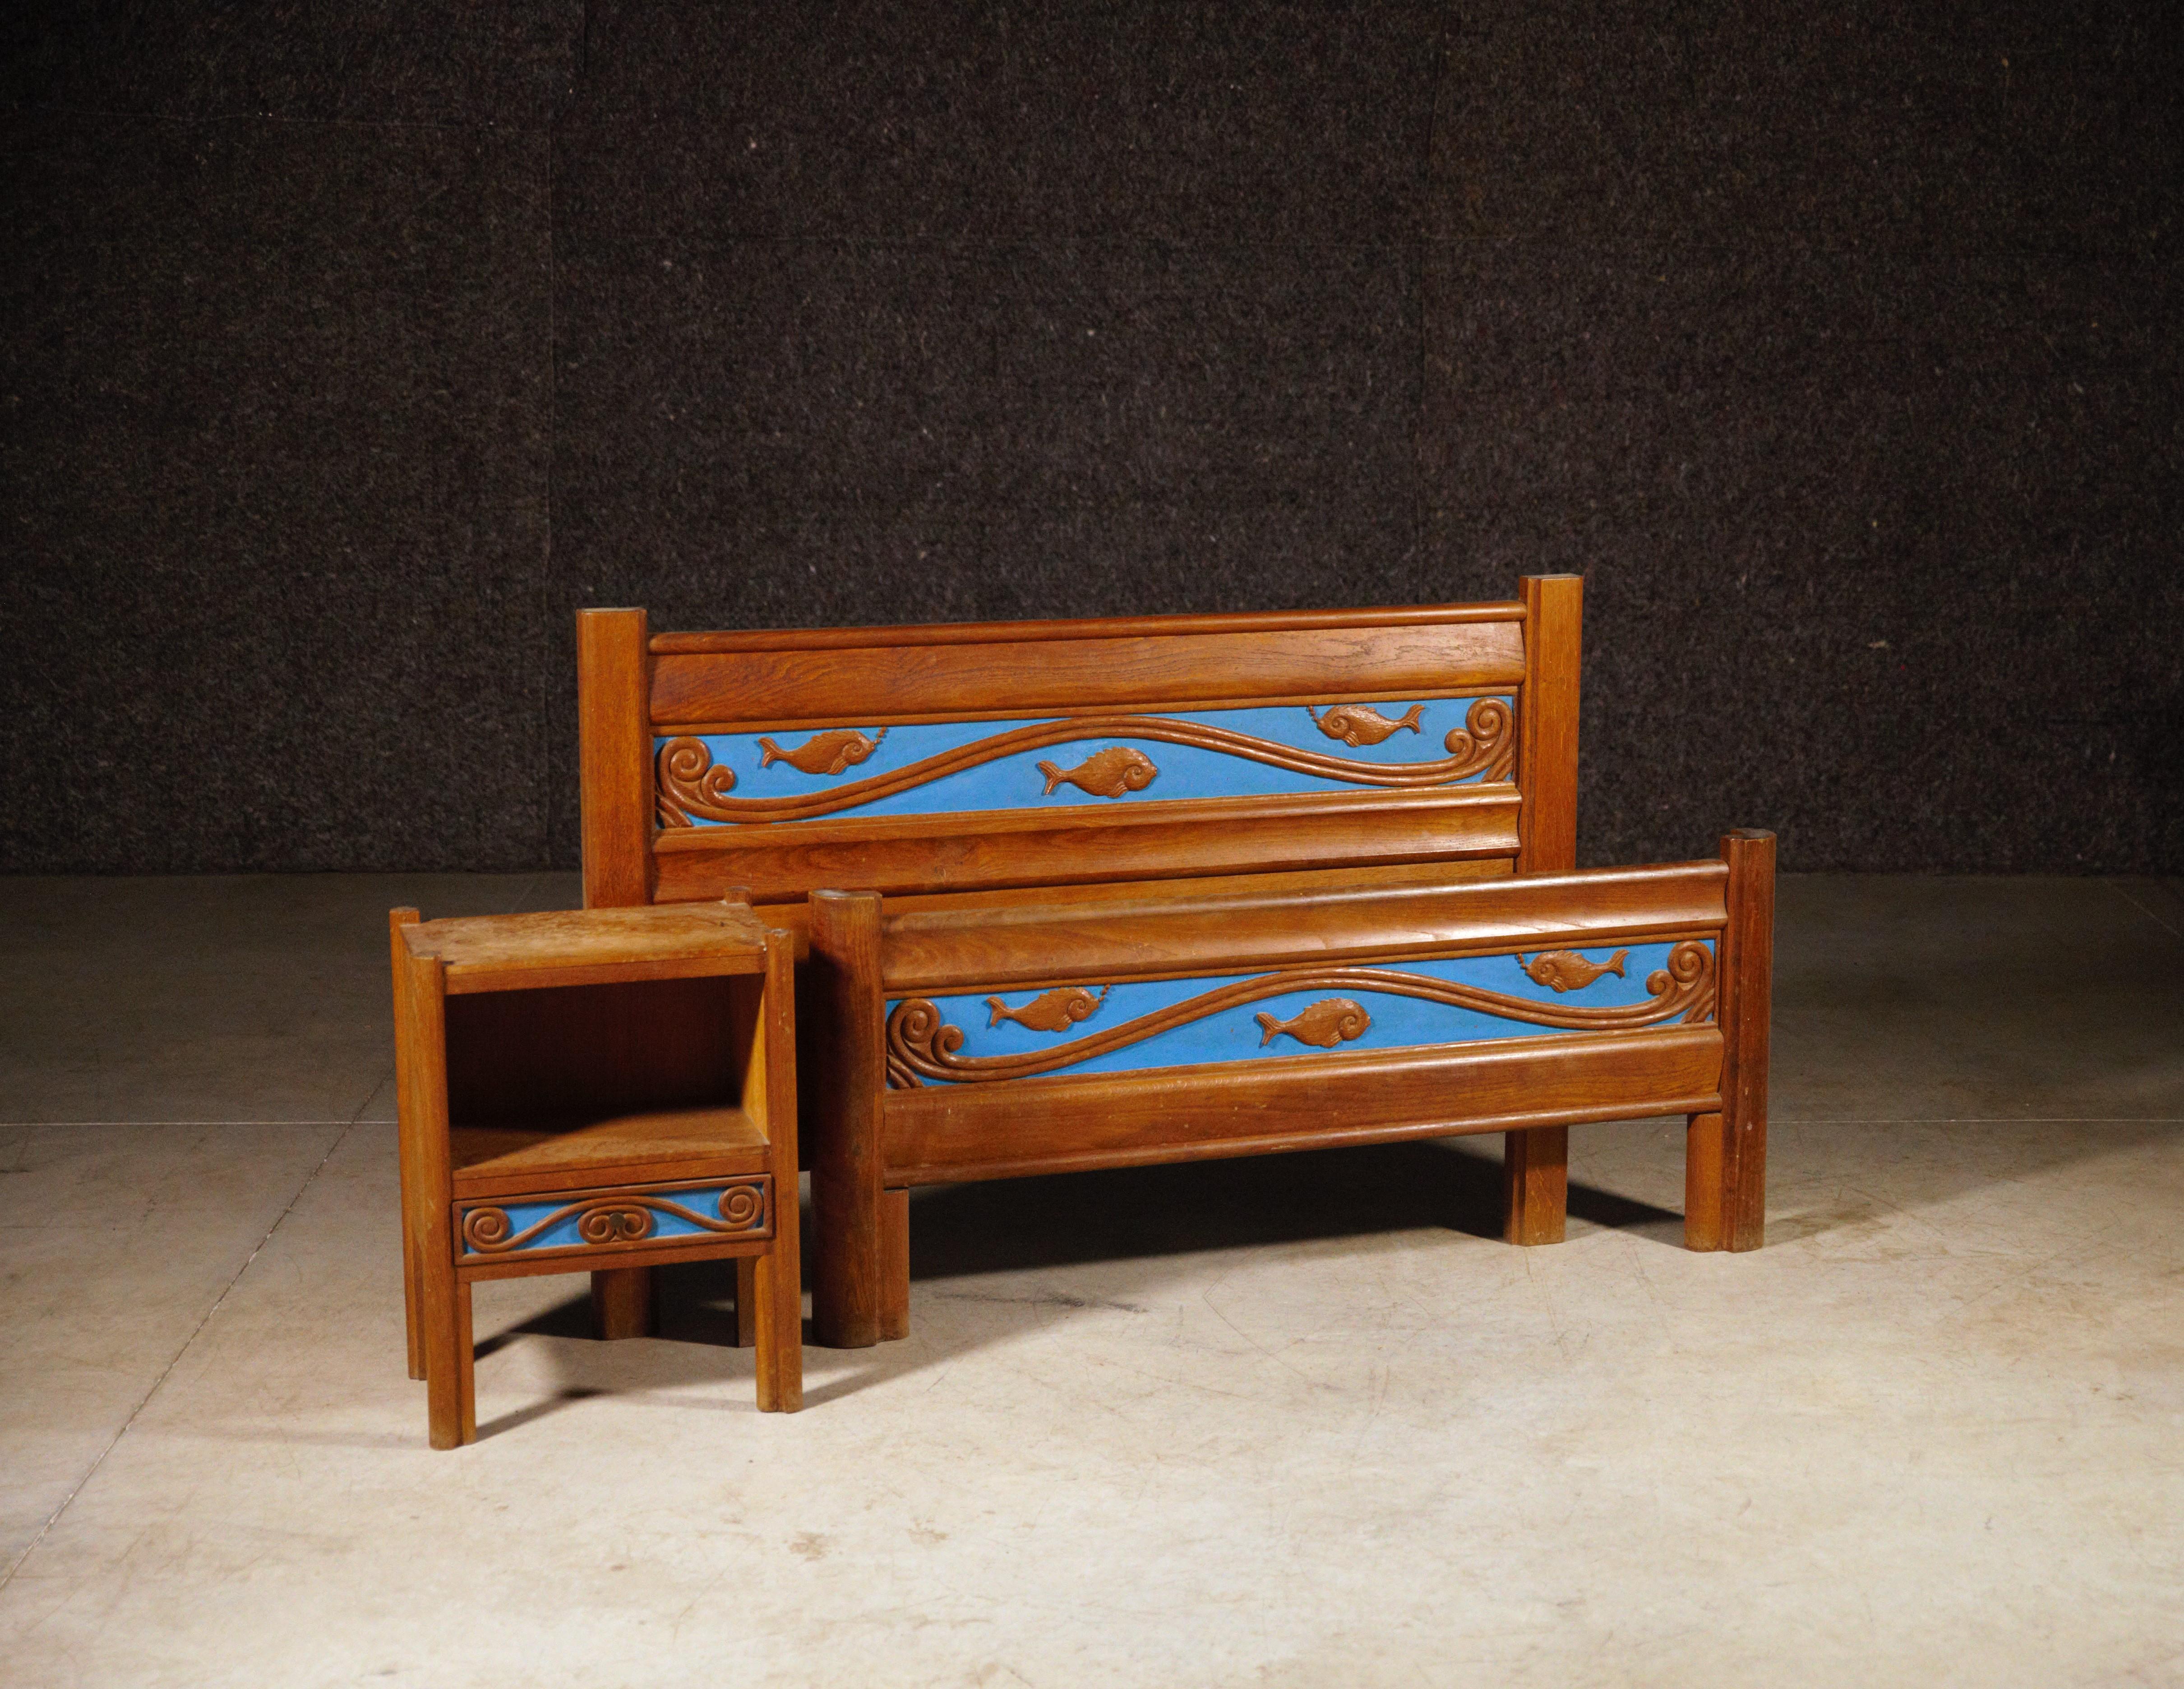 A Marine Theme bed and his bedside table bu Joseph Savina.

In sculpted oak and painted.

Original condition.

Rare model.